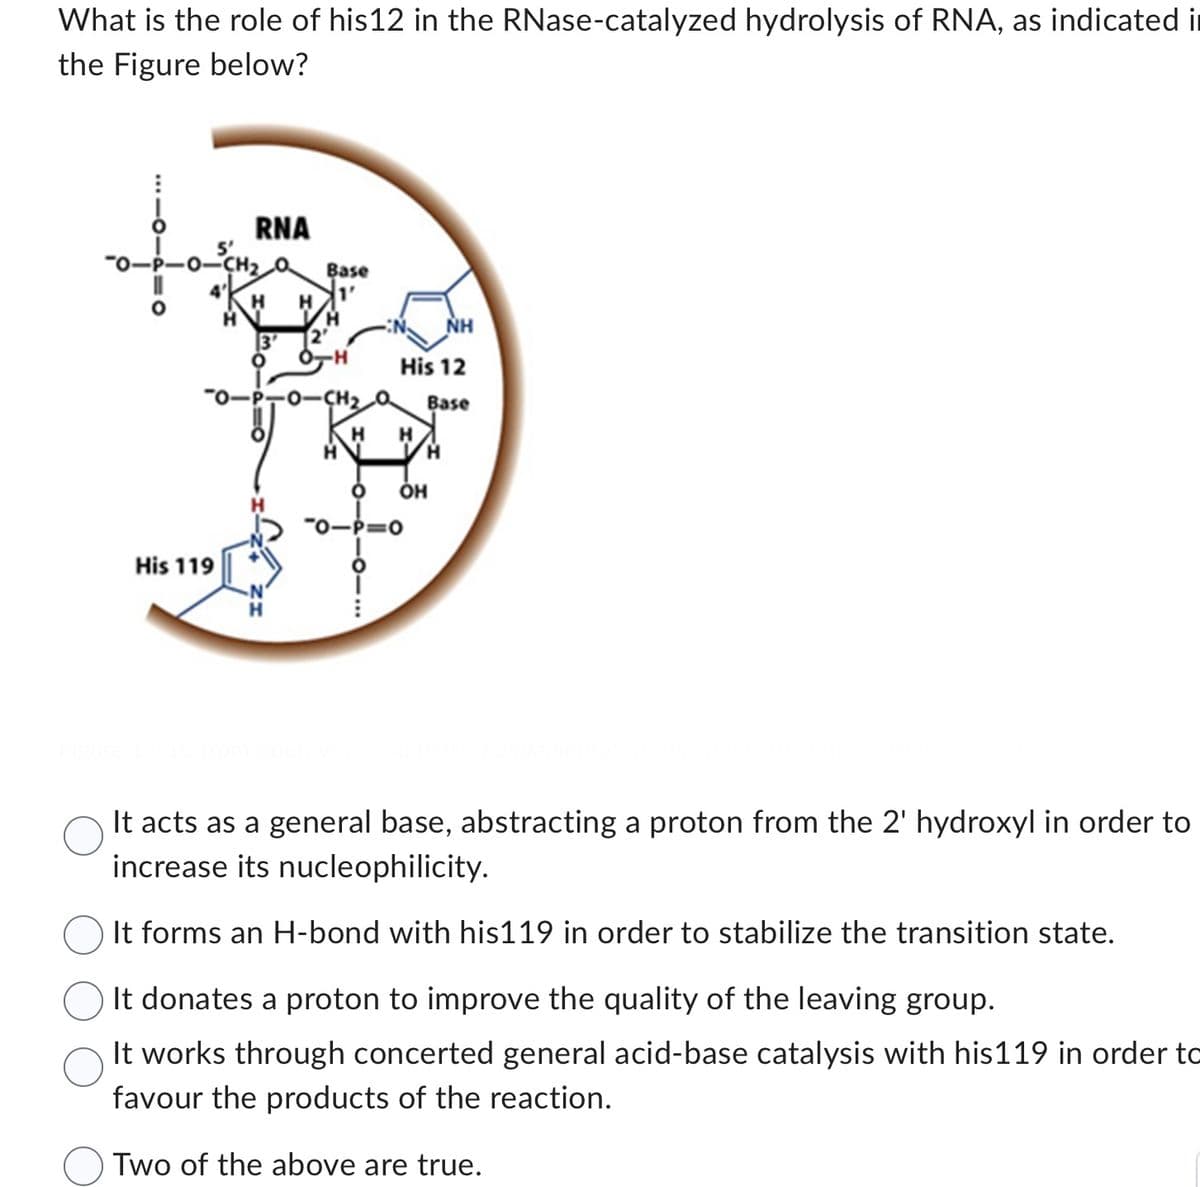 What is the role of his 12 in the RNase-catalyzed hydrolysis of RNA, as indicated in
the Figure below?
5'
His 119
RNA
CH₂
H
H
3
O
Base
1'
12'
8-H
His 12
-P-0-CH₂ a Base
H H
O
-0-P=O
H
OH
NH
It acts as a general base, abstracting a proton from the 2' hydroxyl in order to
increase its nucleophilicity.
It forms an H-bond with his119 in order to stabilize the transition state.
It donates a proton to improve the quality of the leaving group.
It works through concerted general acid-base catalysis with his119 in order to
favour the products of the reaction.
Two of the above are true.